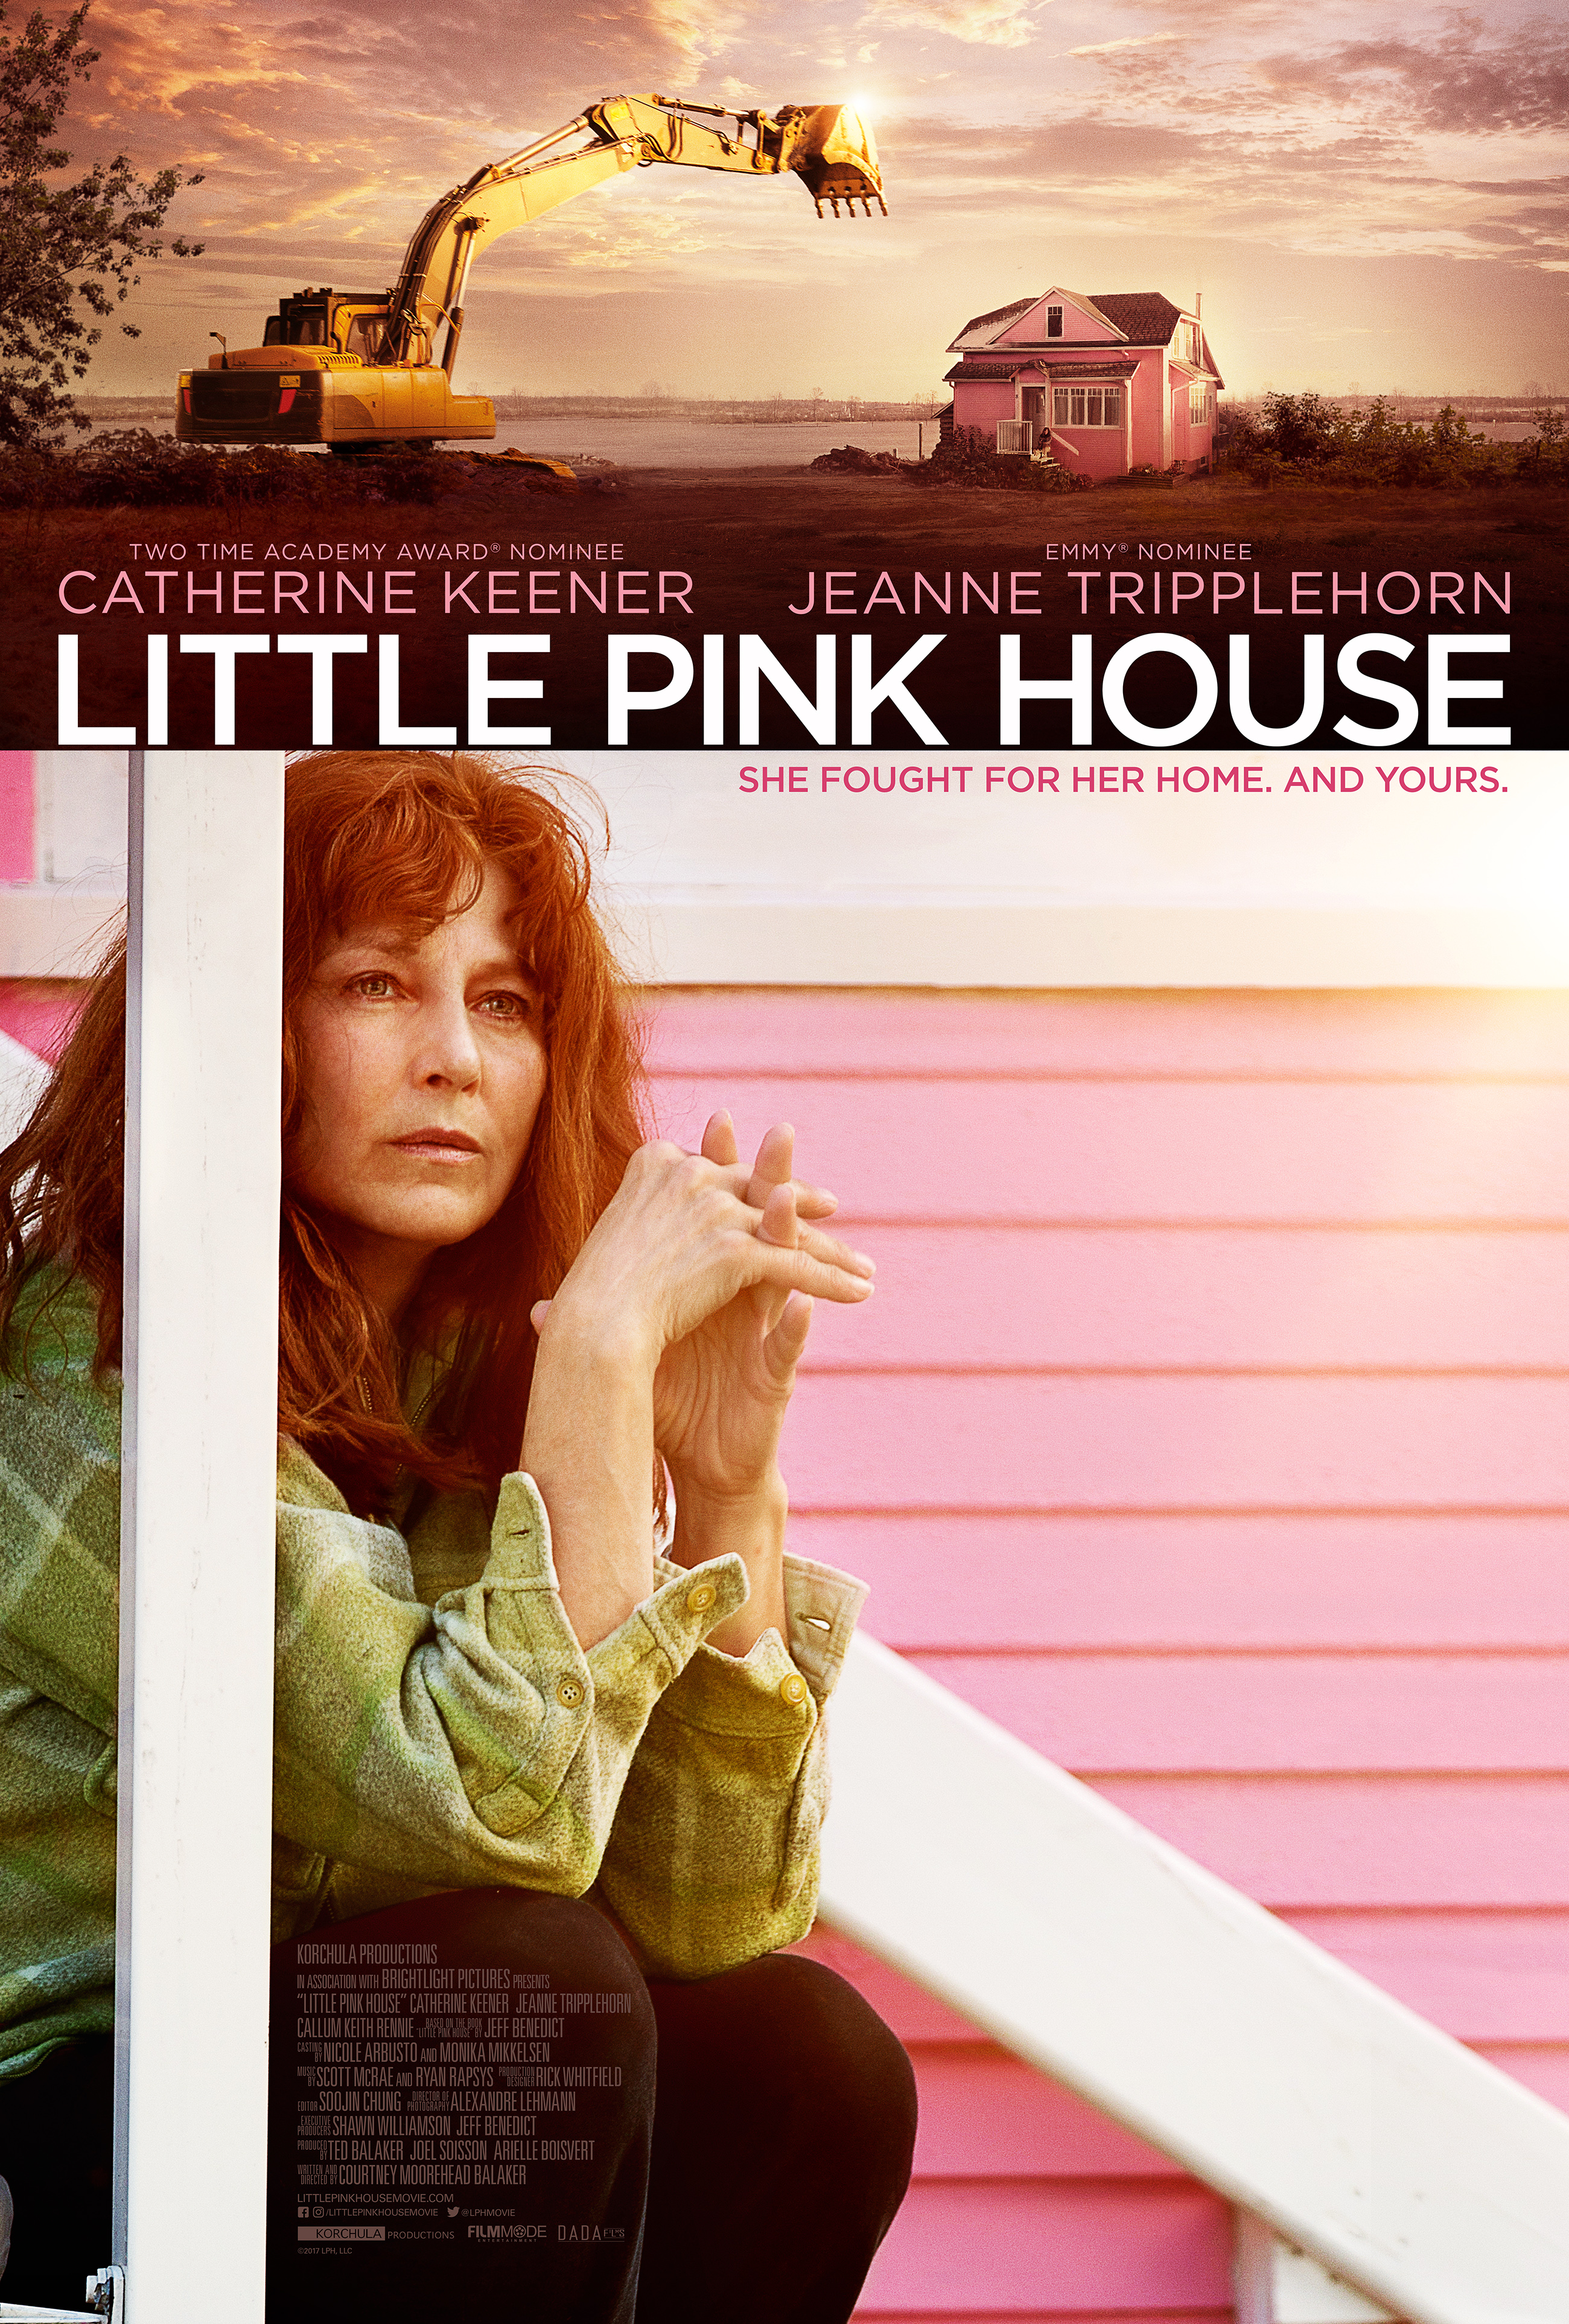 Movies for Libertarians: Little Pink House